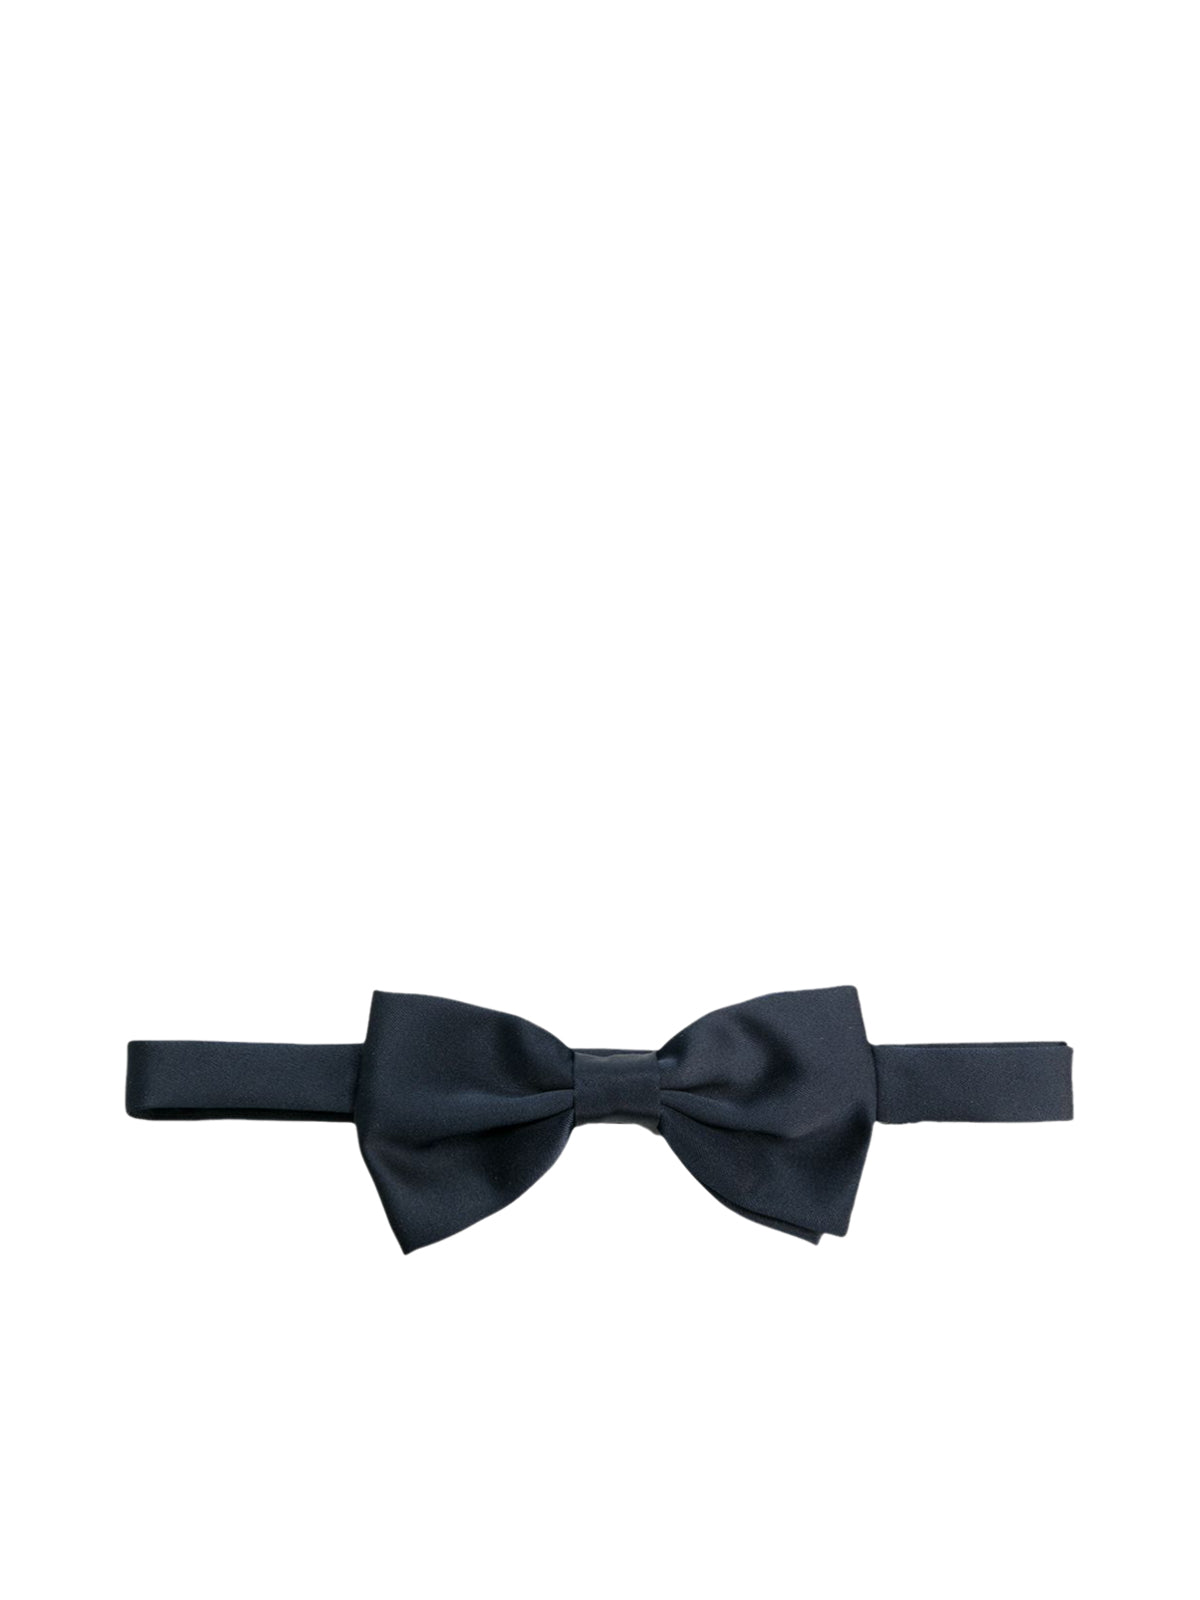 Classic blue bow tie